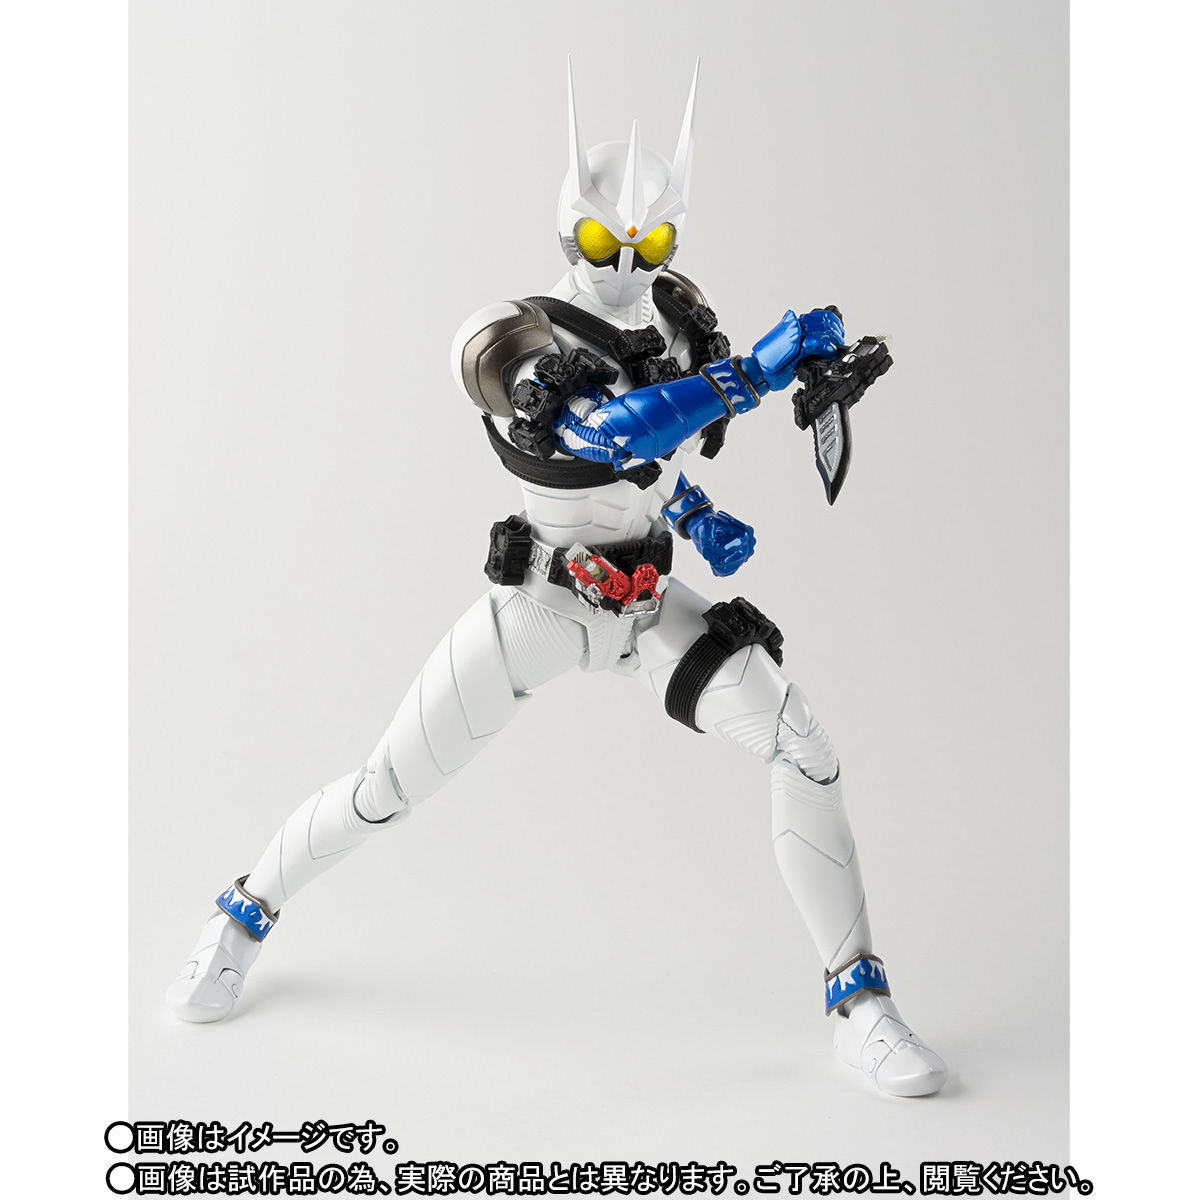 S.H.Figuarts(真骨彫製法) 仮面ライダーエターナル 4限定⭐︎美品 